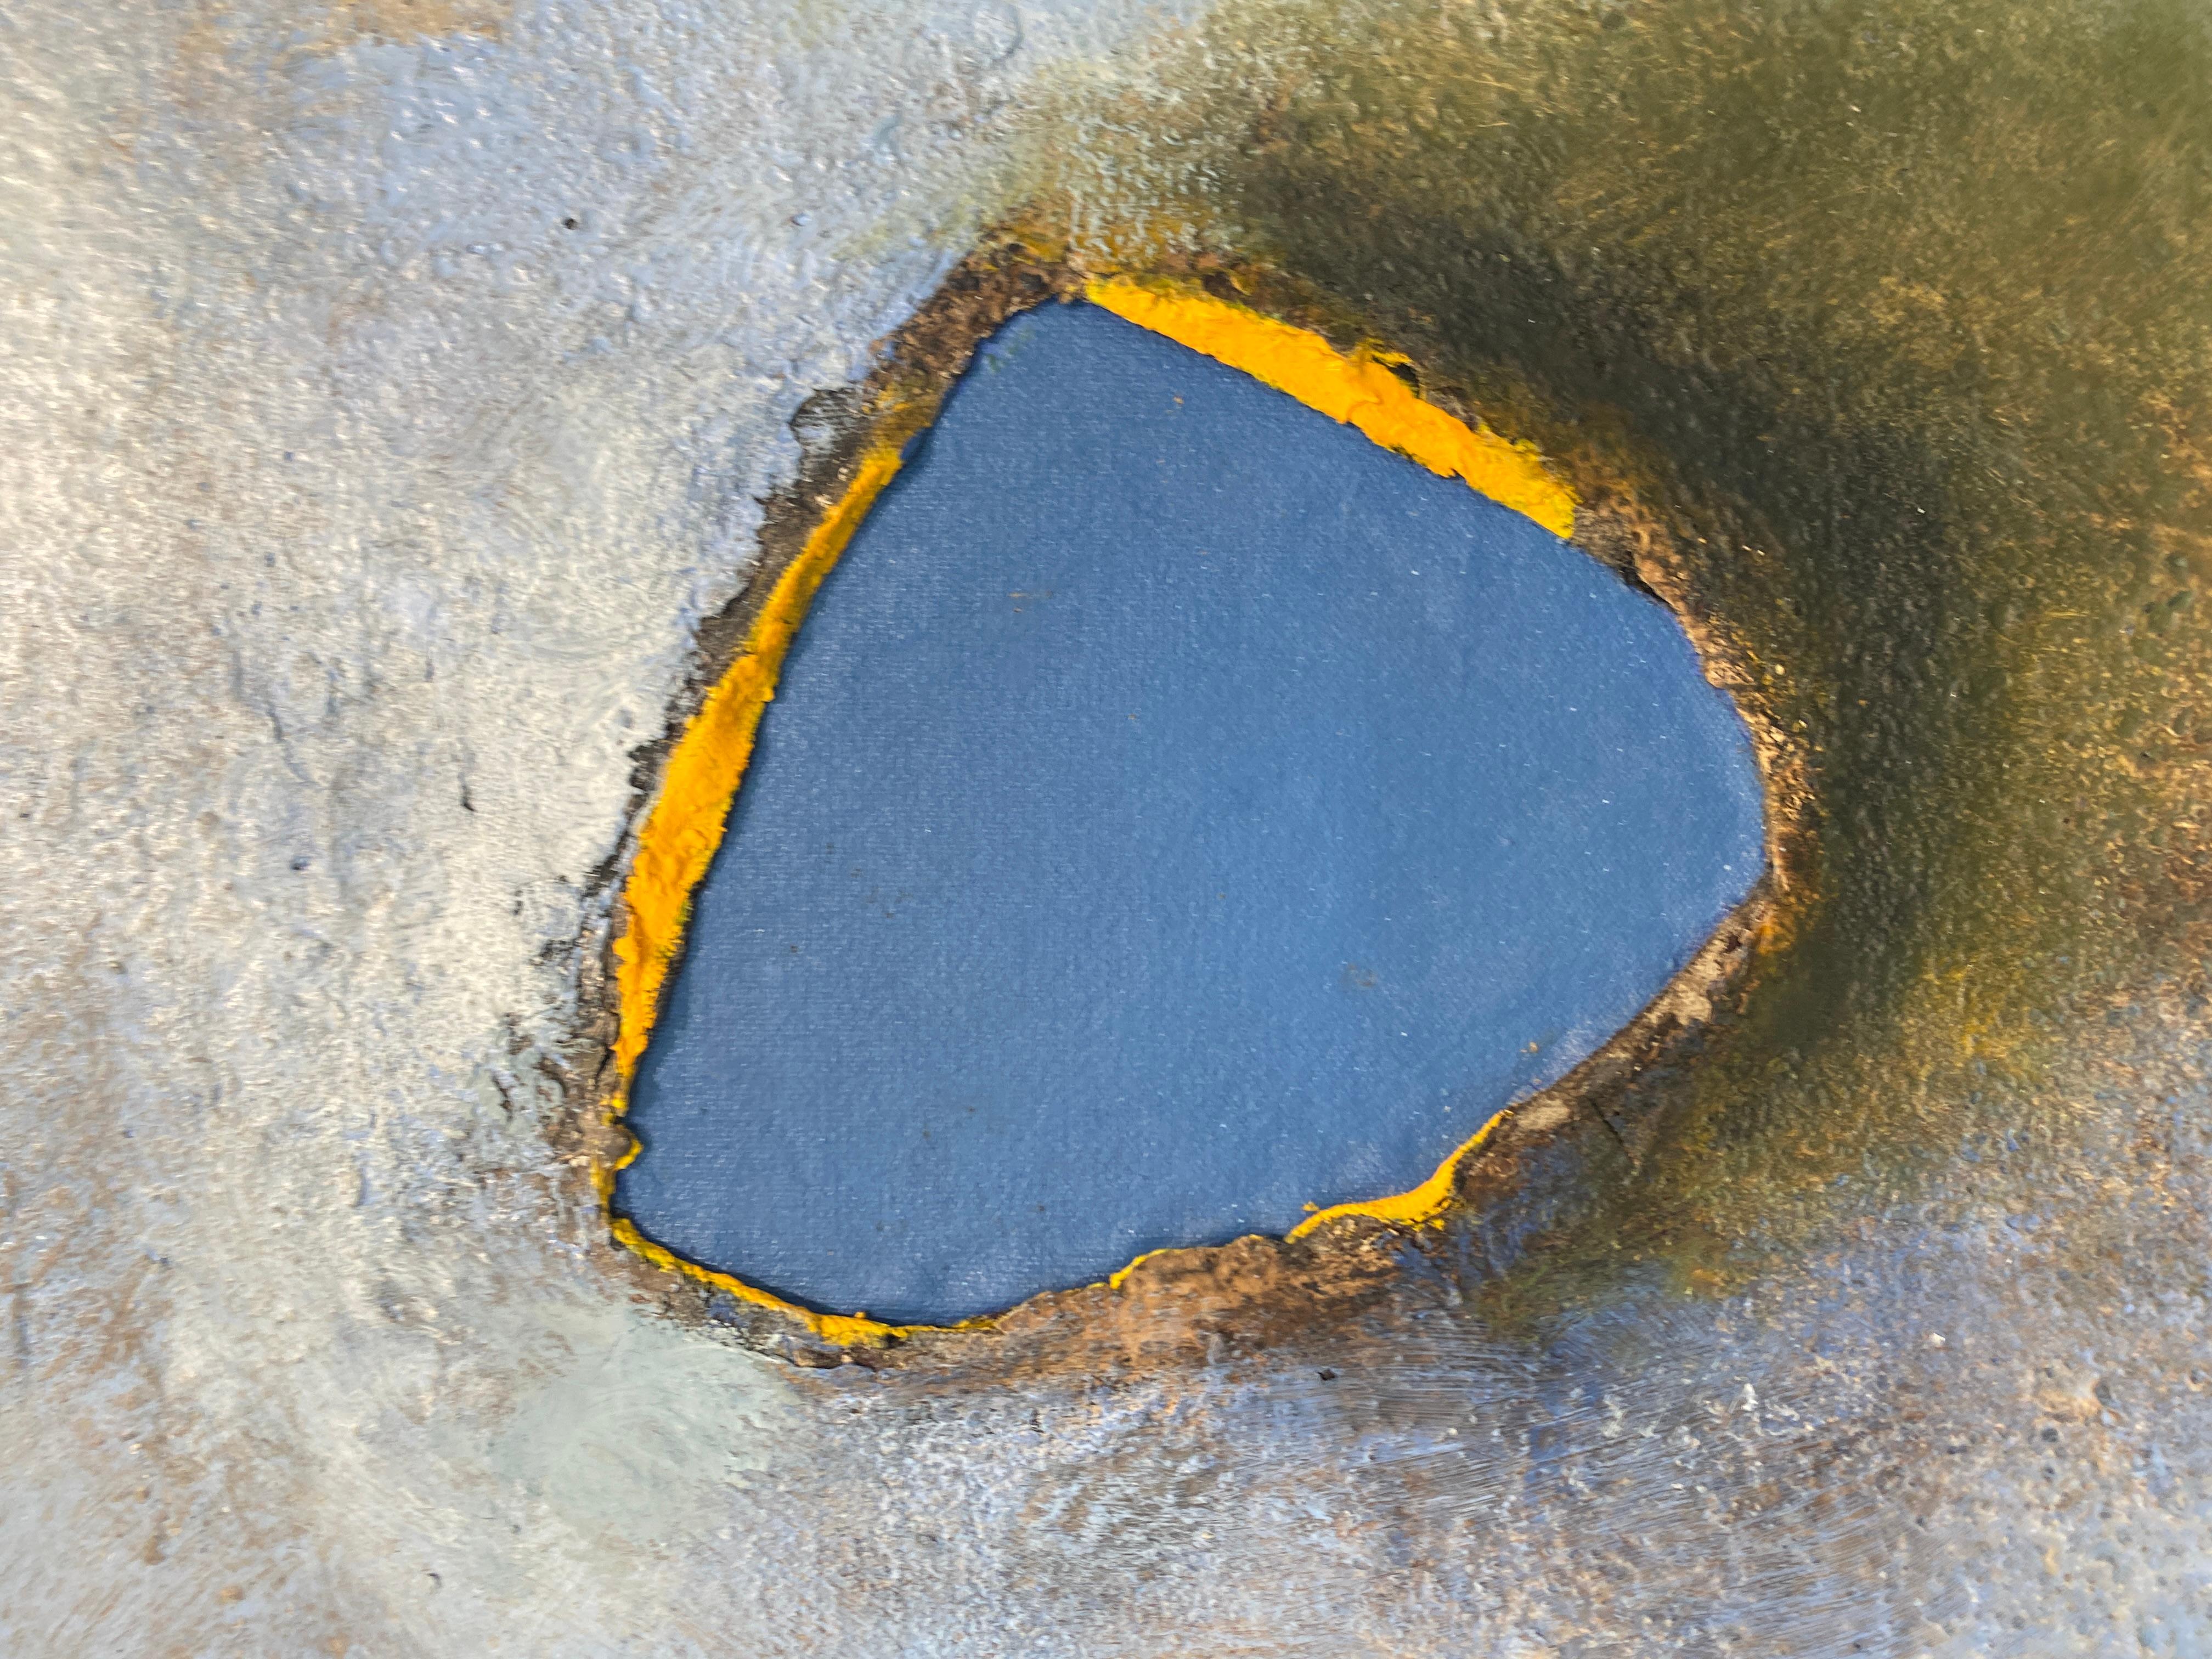 Blasted Through and it's Blue, oil painting, encaustic, abstract blue and yellow - Abstract Painting by Tania Dibbs